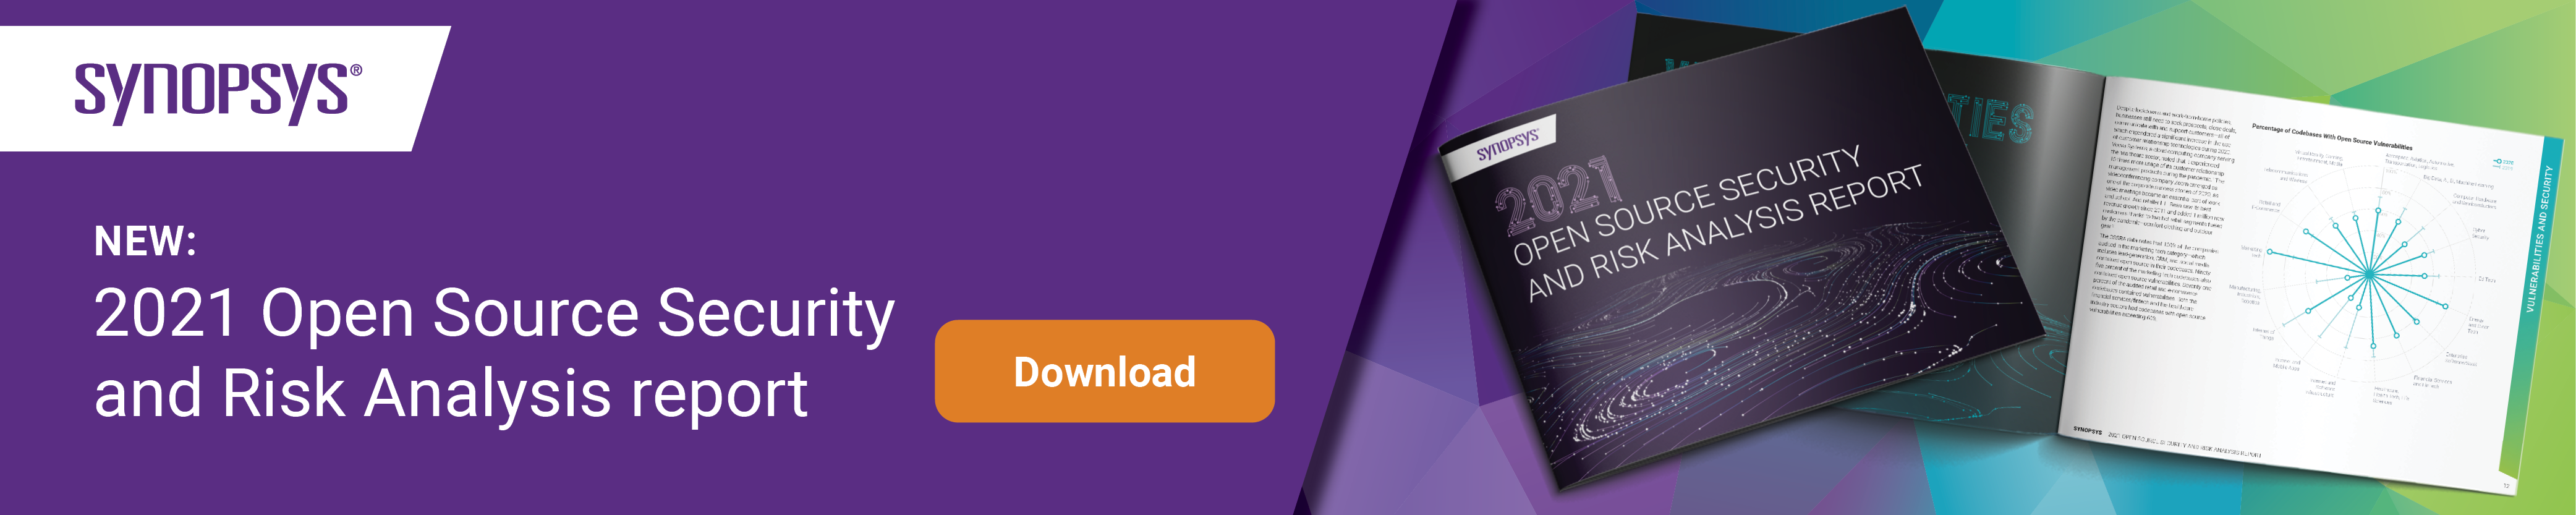 Download the OSSRA 2021 report | Synopsys